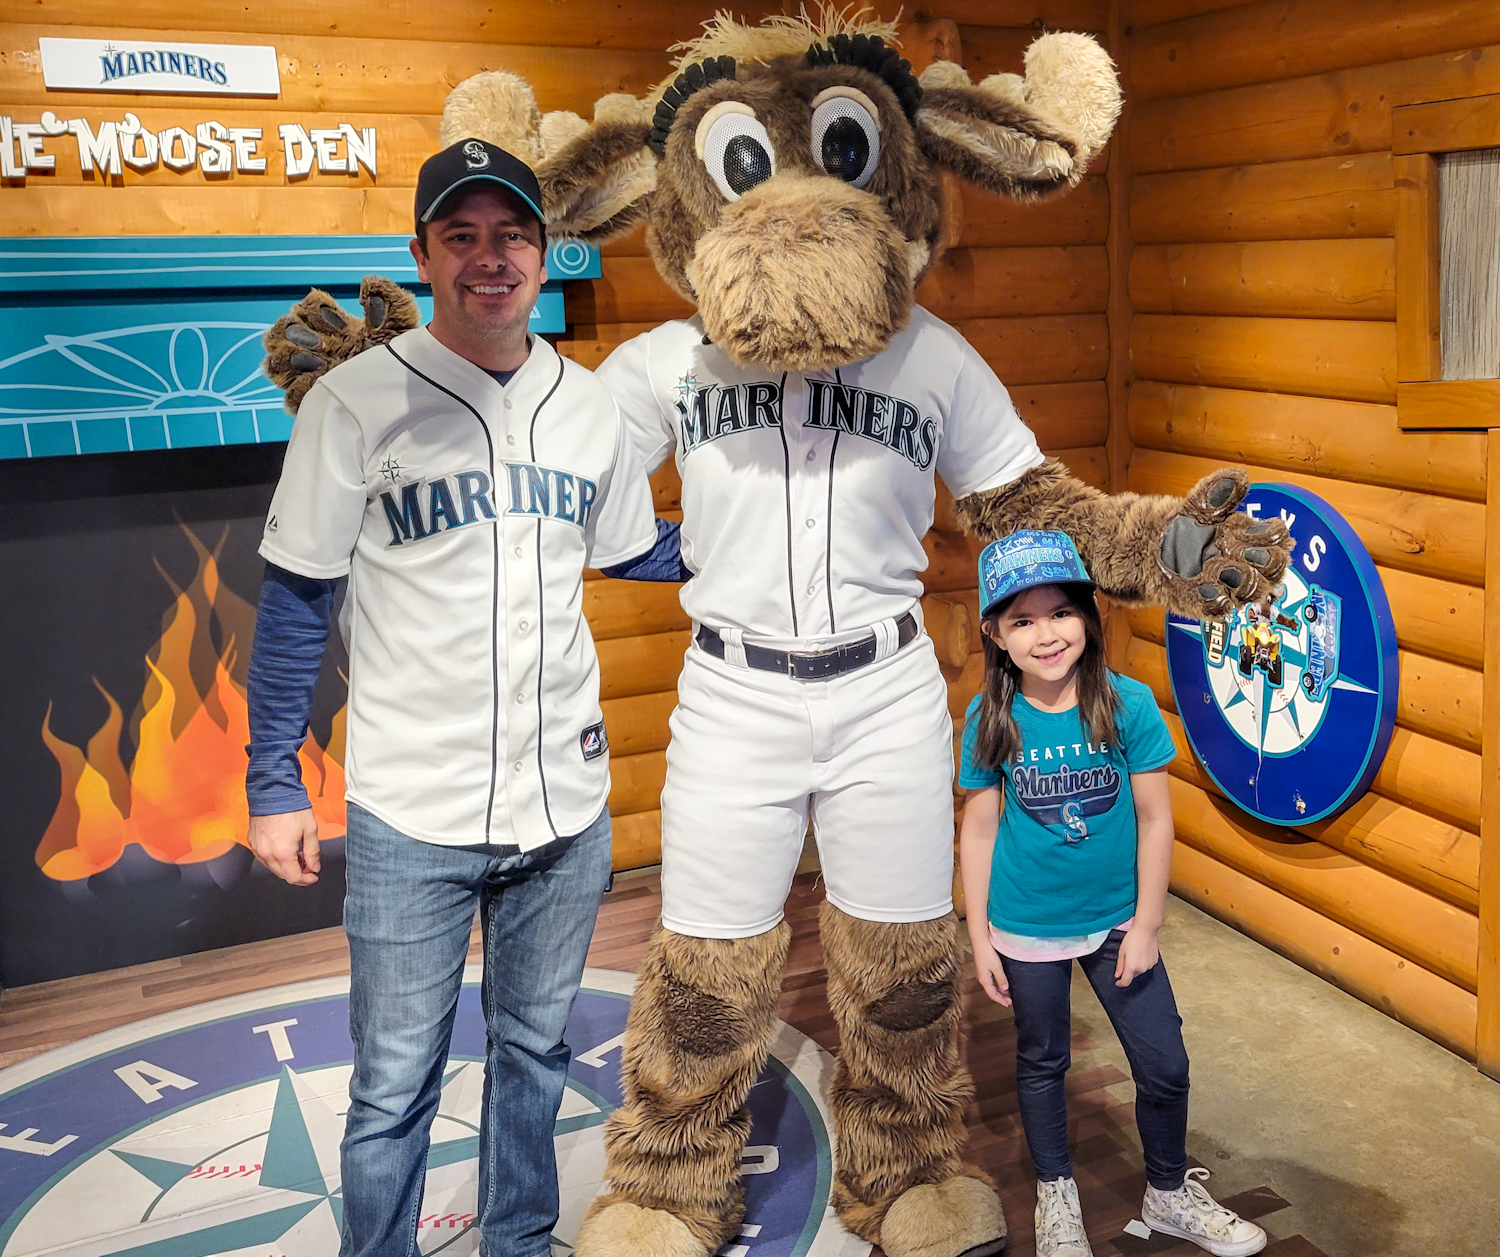 Image of Josh and his daughter, Olivia, along with the Mariners Moose at a home game in Seattle.